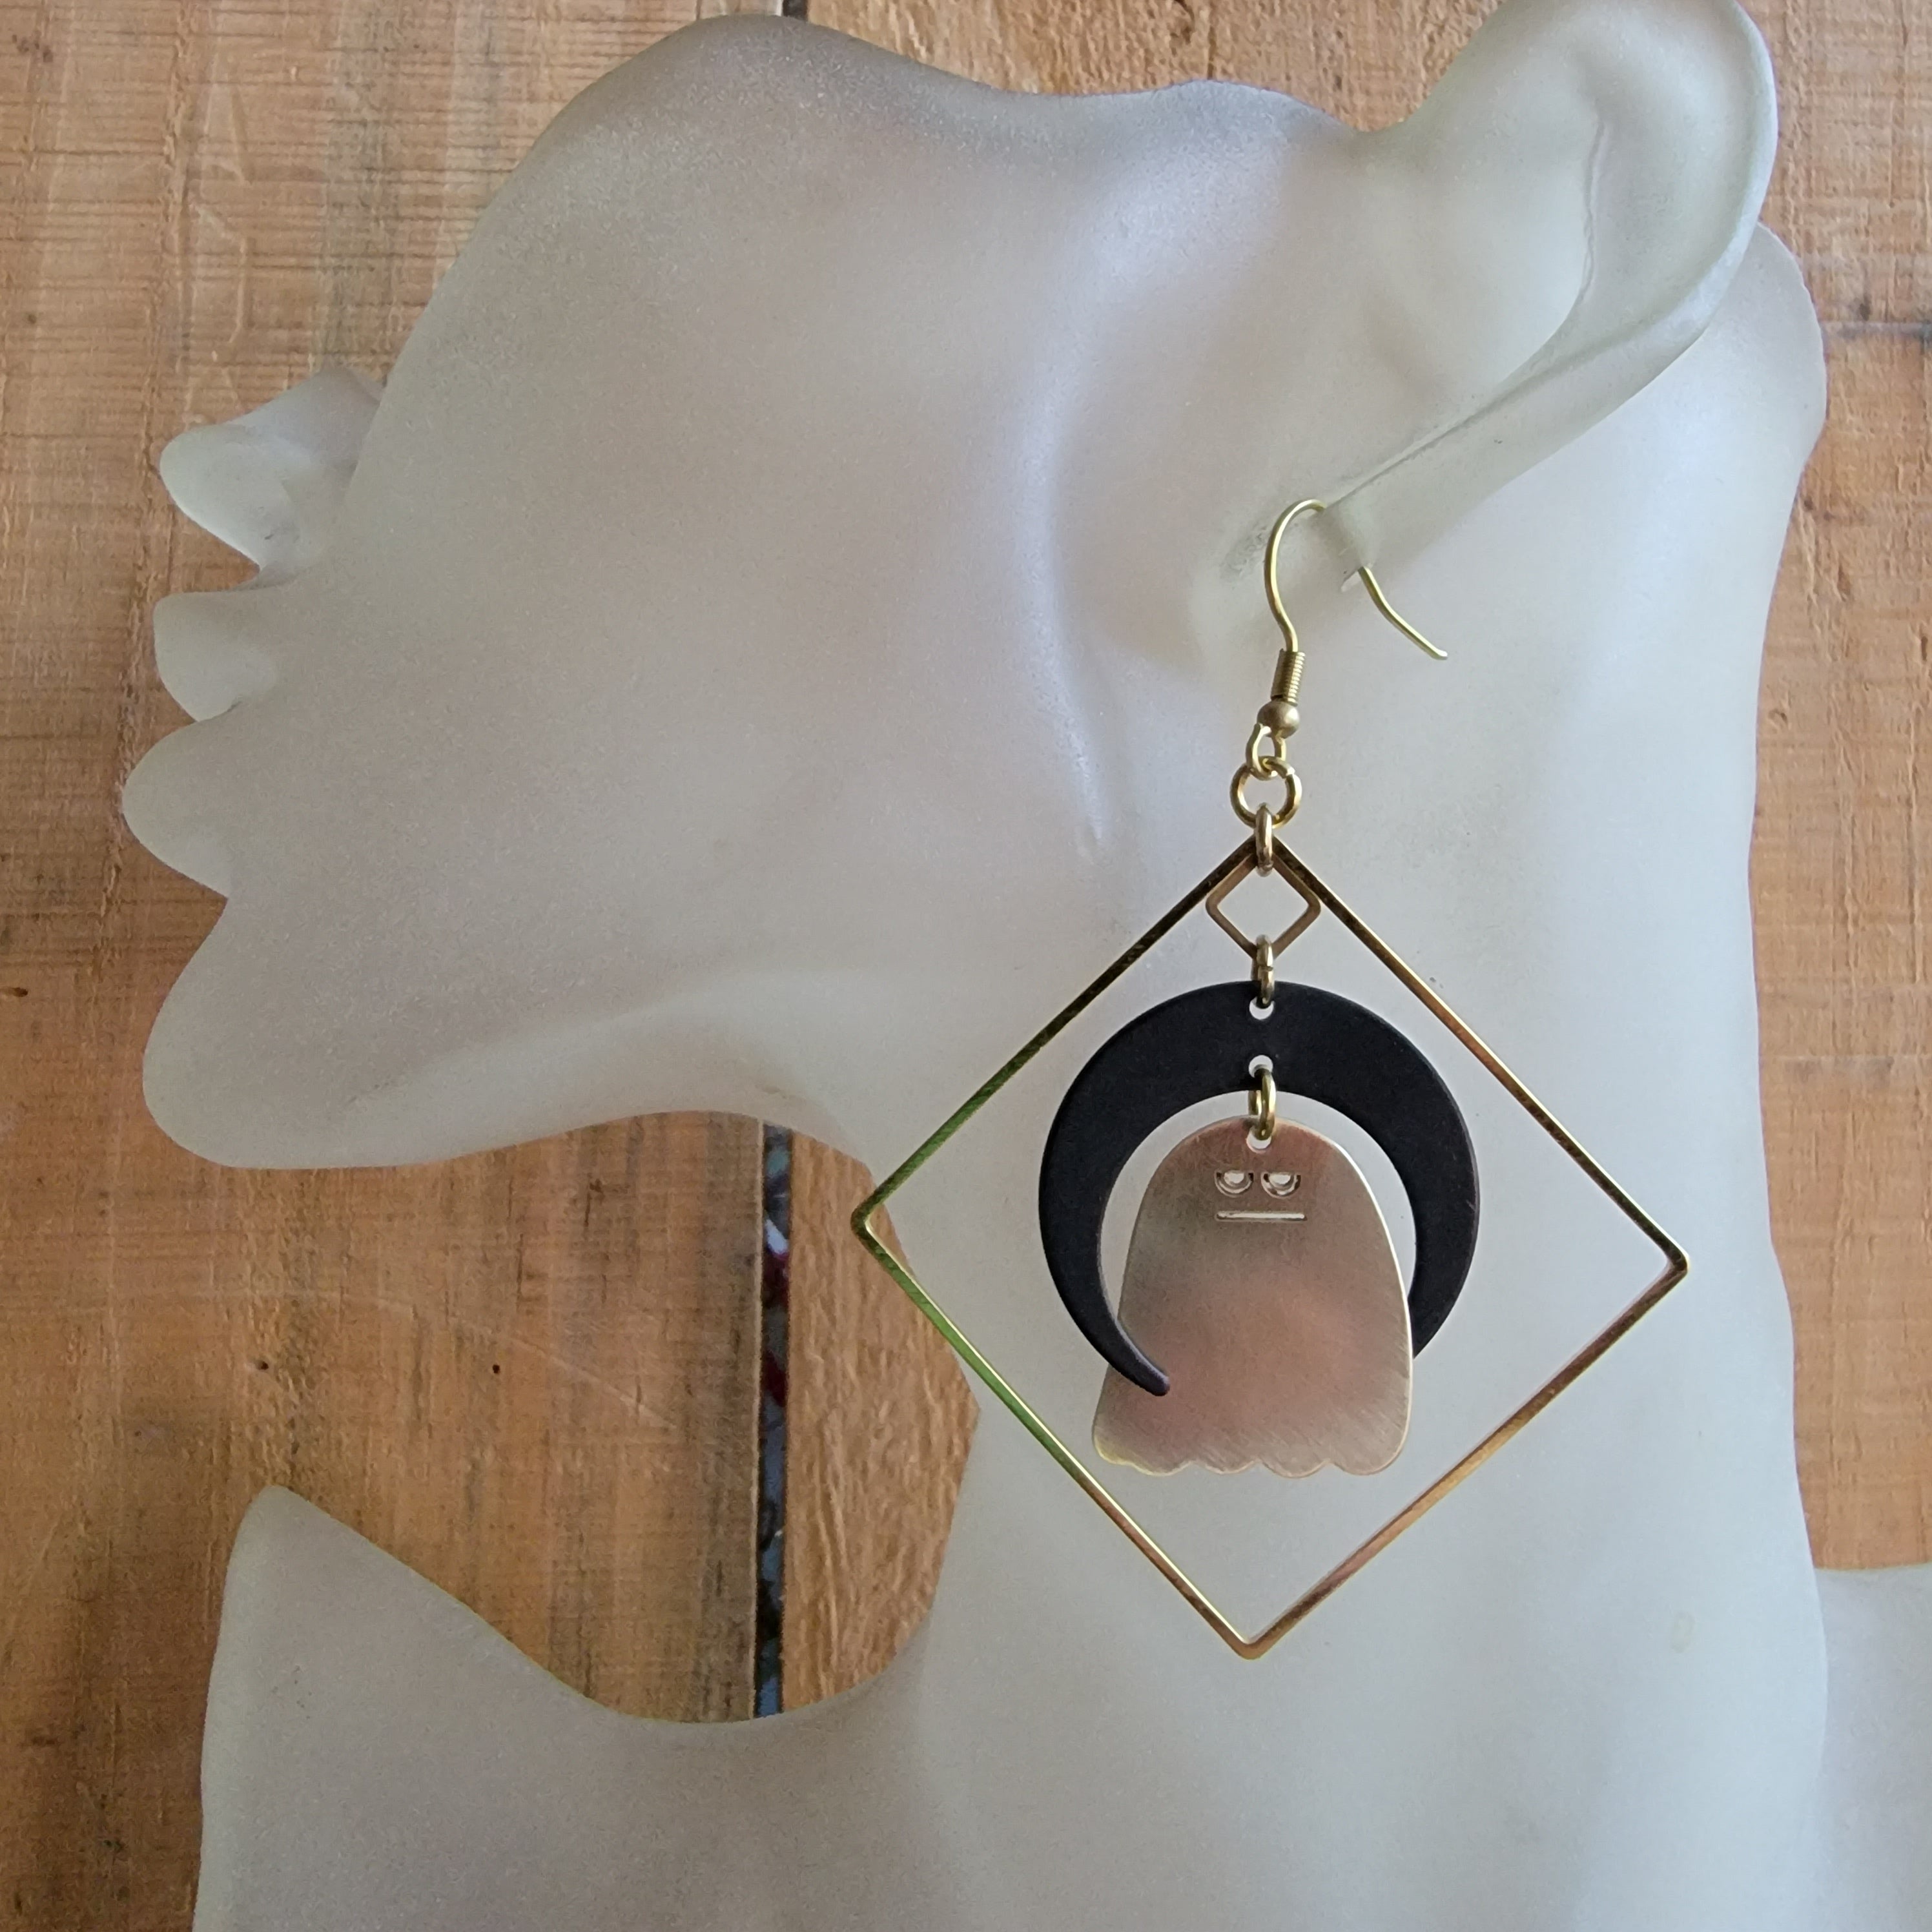 Elemental Metals Collection   Grumpy Ghosts  Celestially-Inspired Brass Earrings